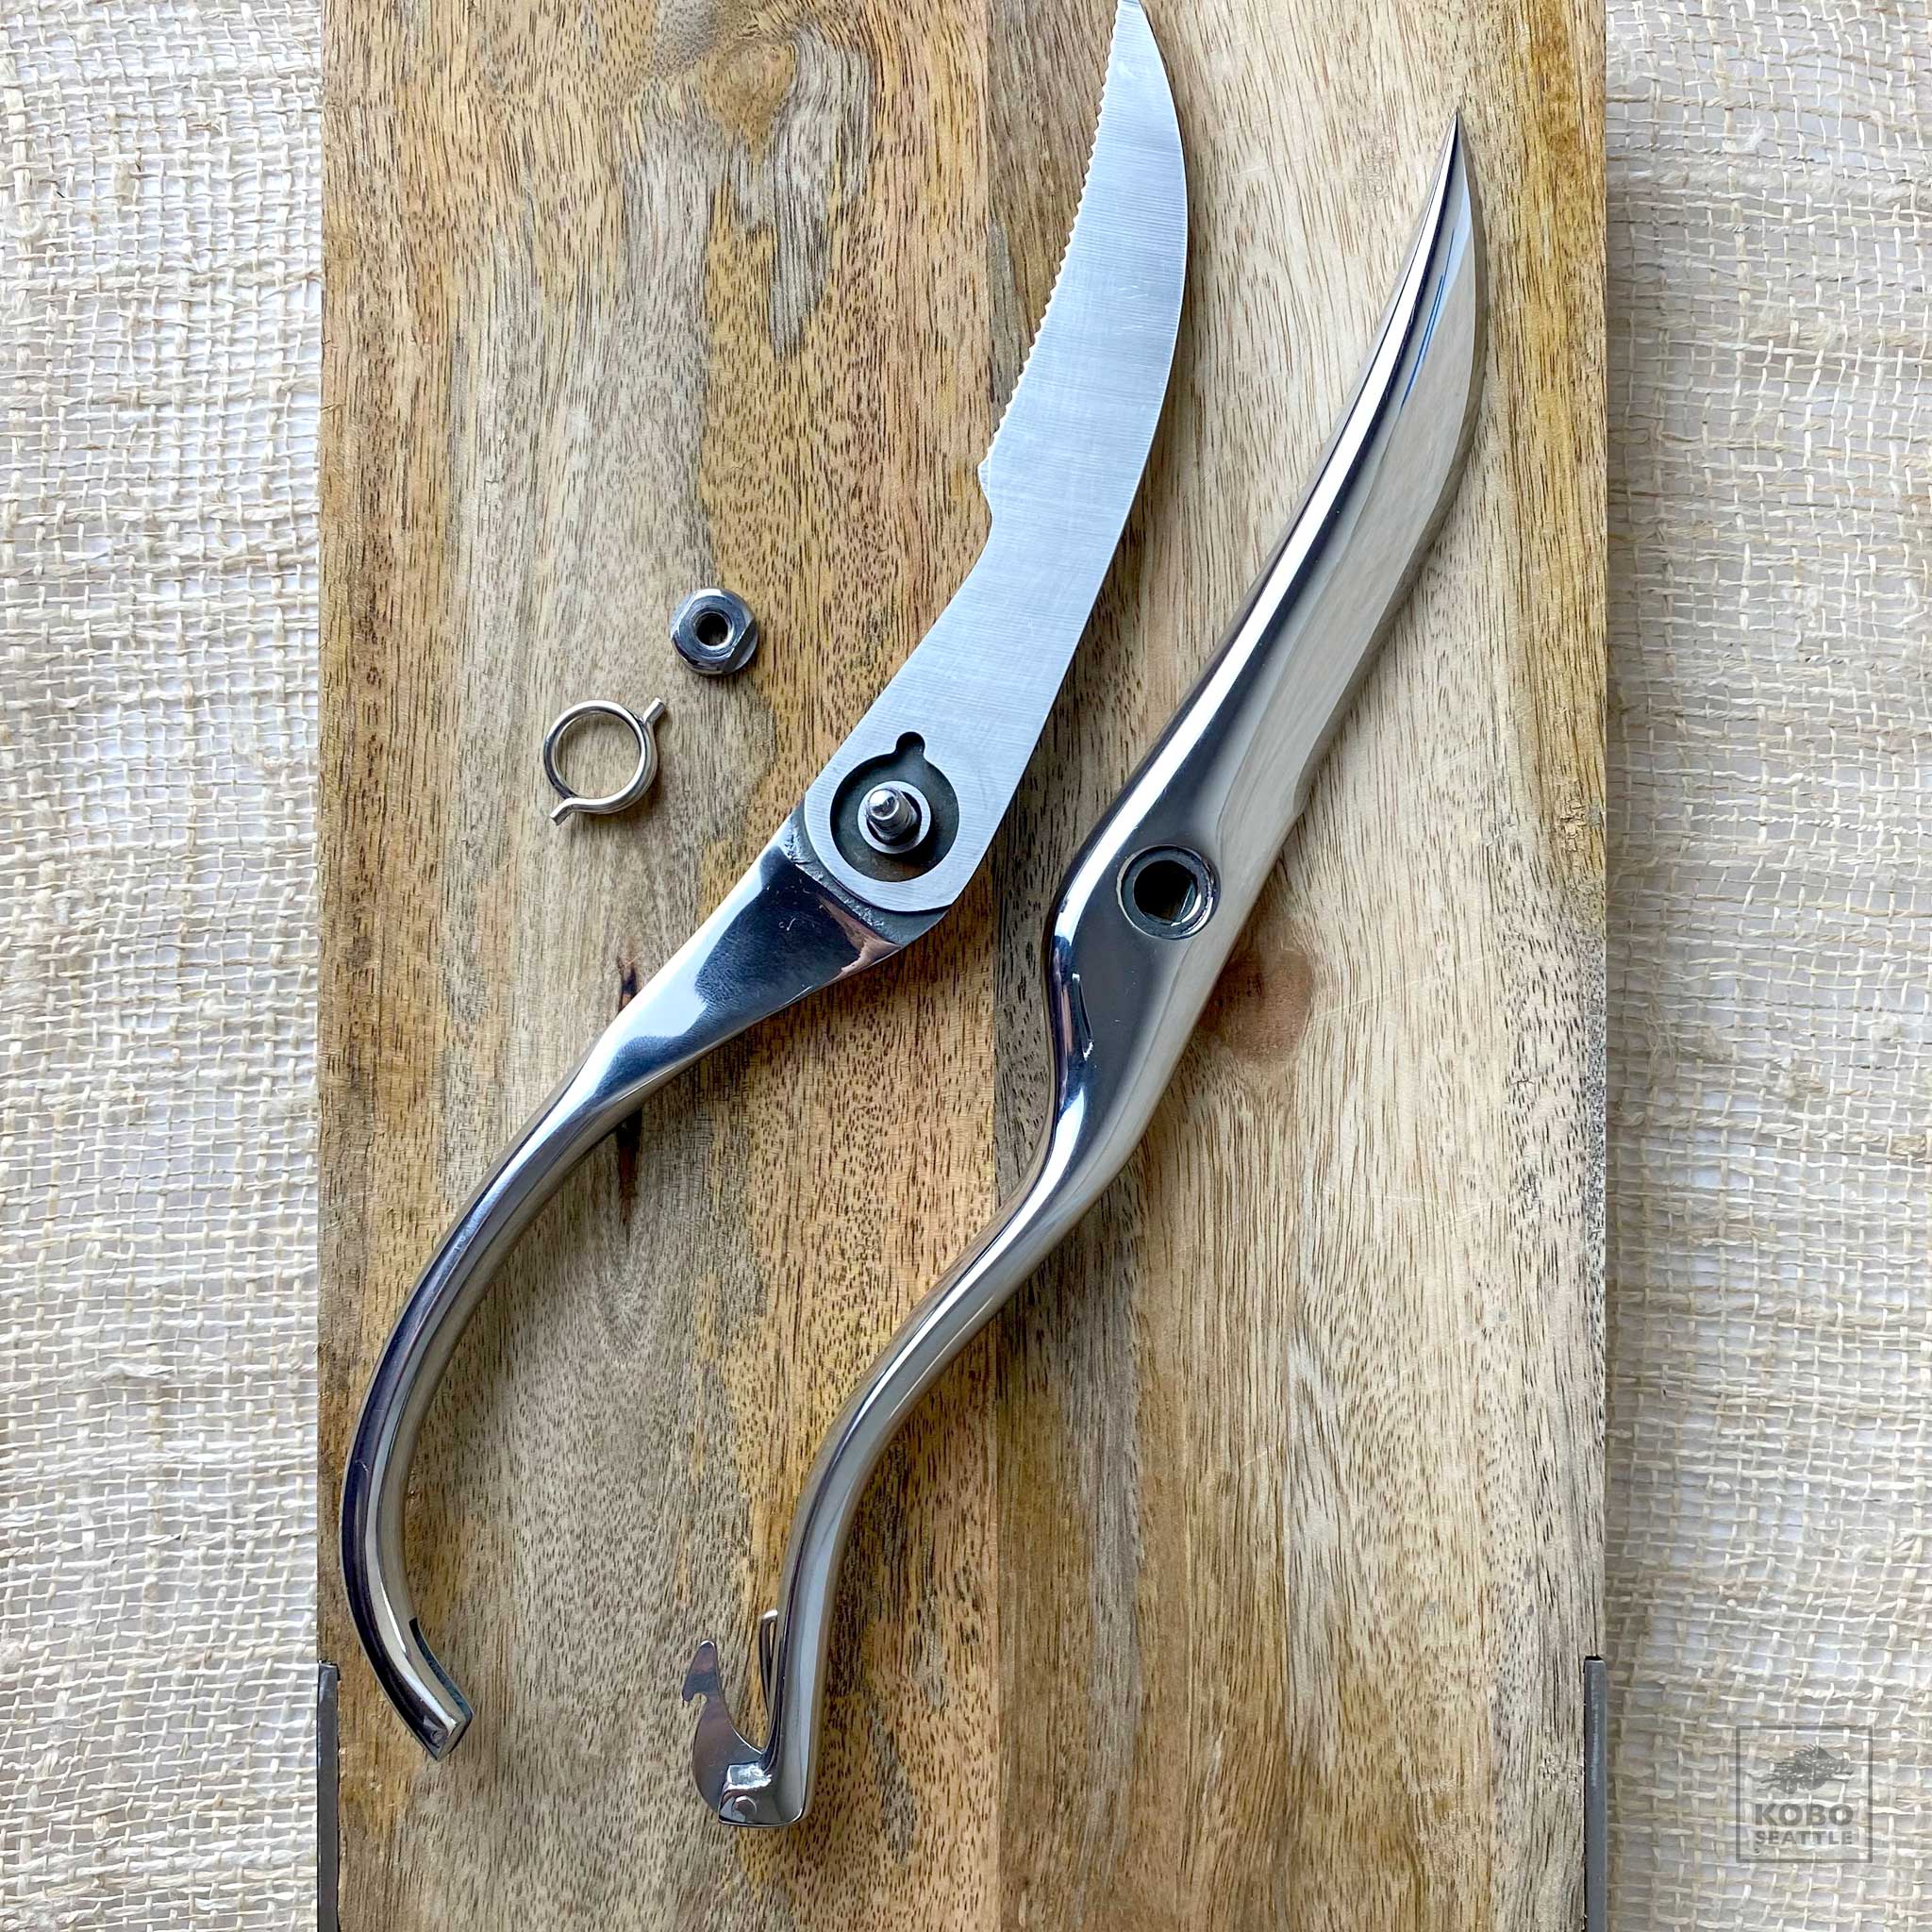 Poultry shears